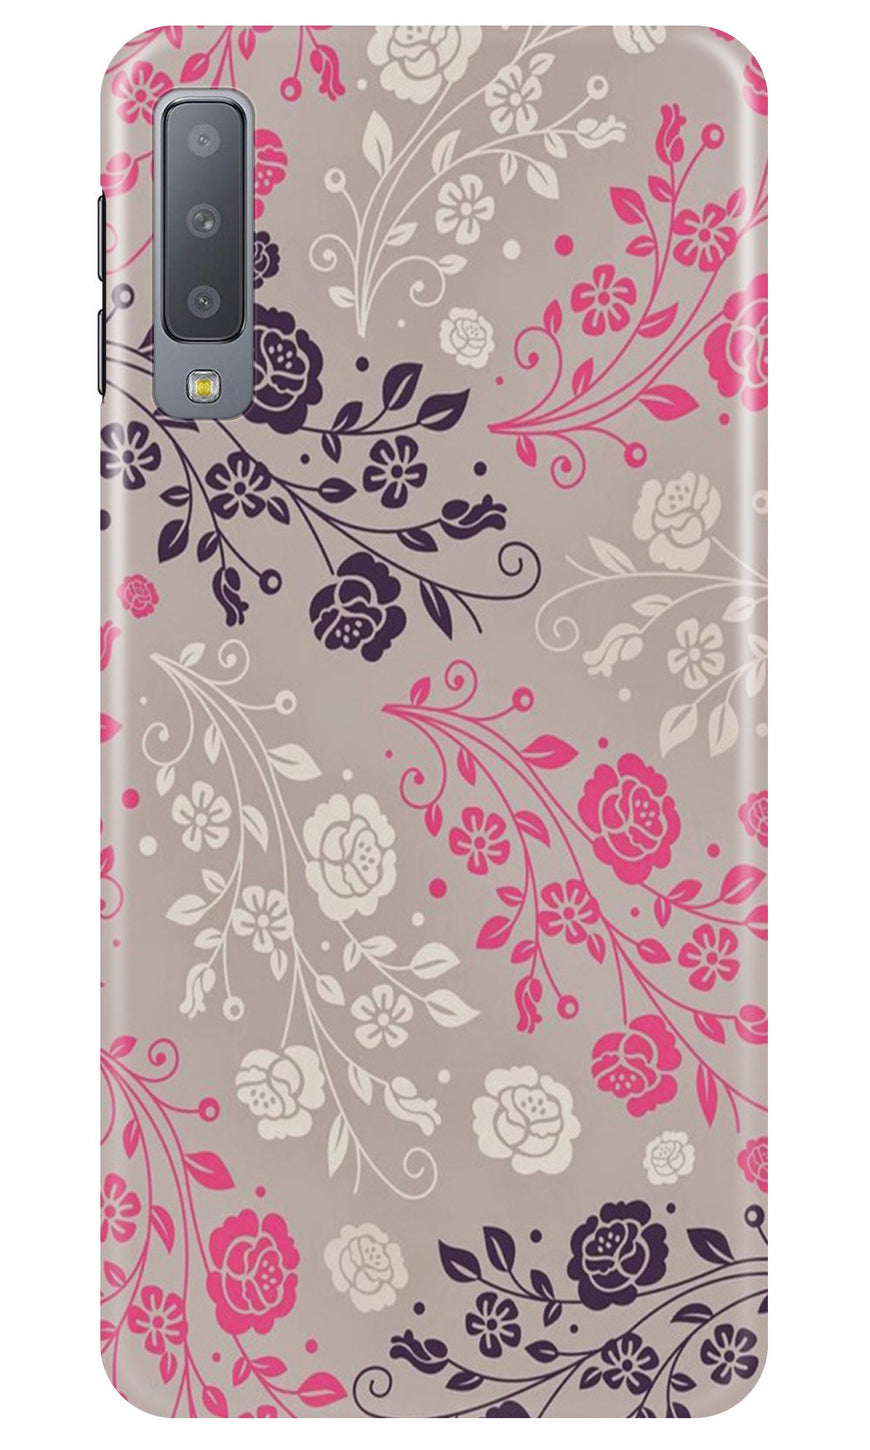 Pattern2 Case for Samsung A50